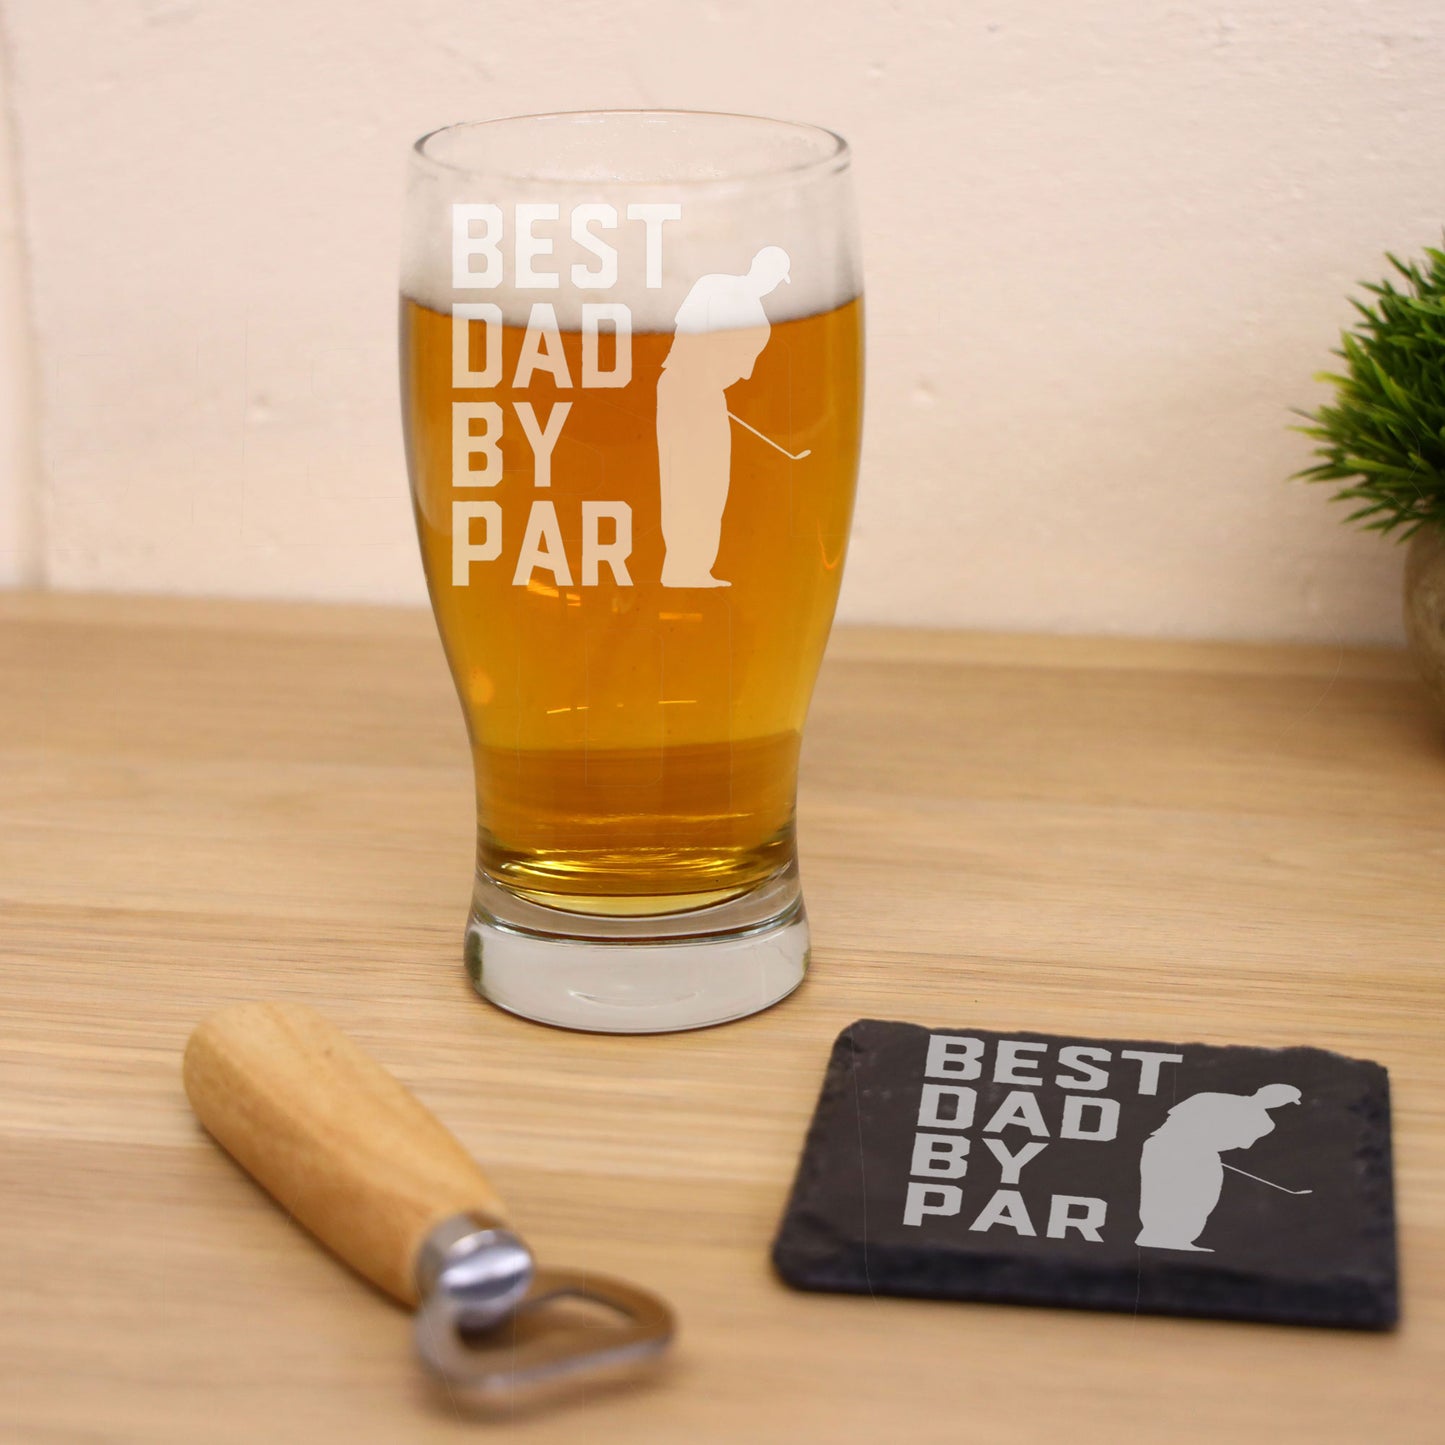 Best Dad By Par Engraved Beer Glass and/or Coaster Set  - Always Looking Good - Glass & Square Coaster Set  